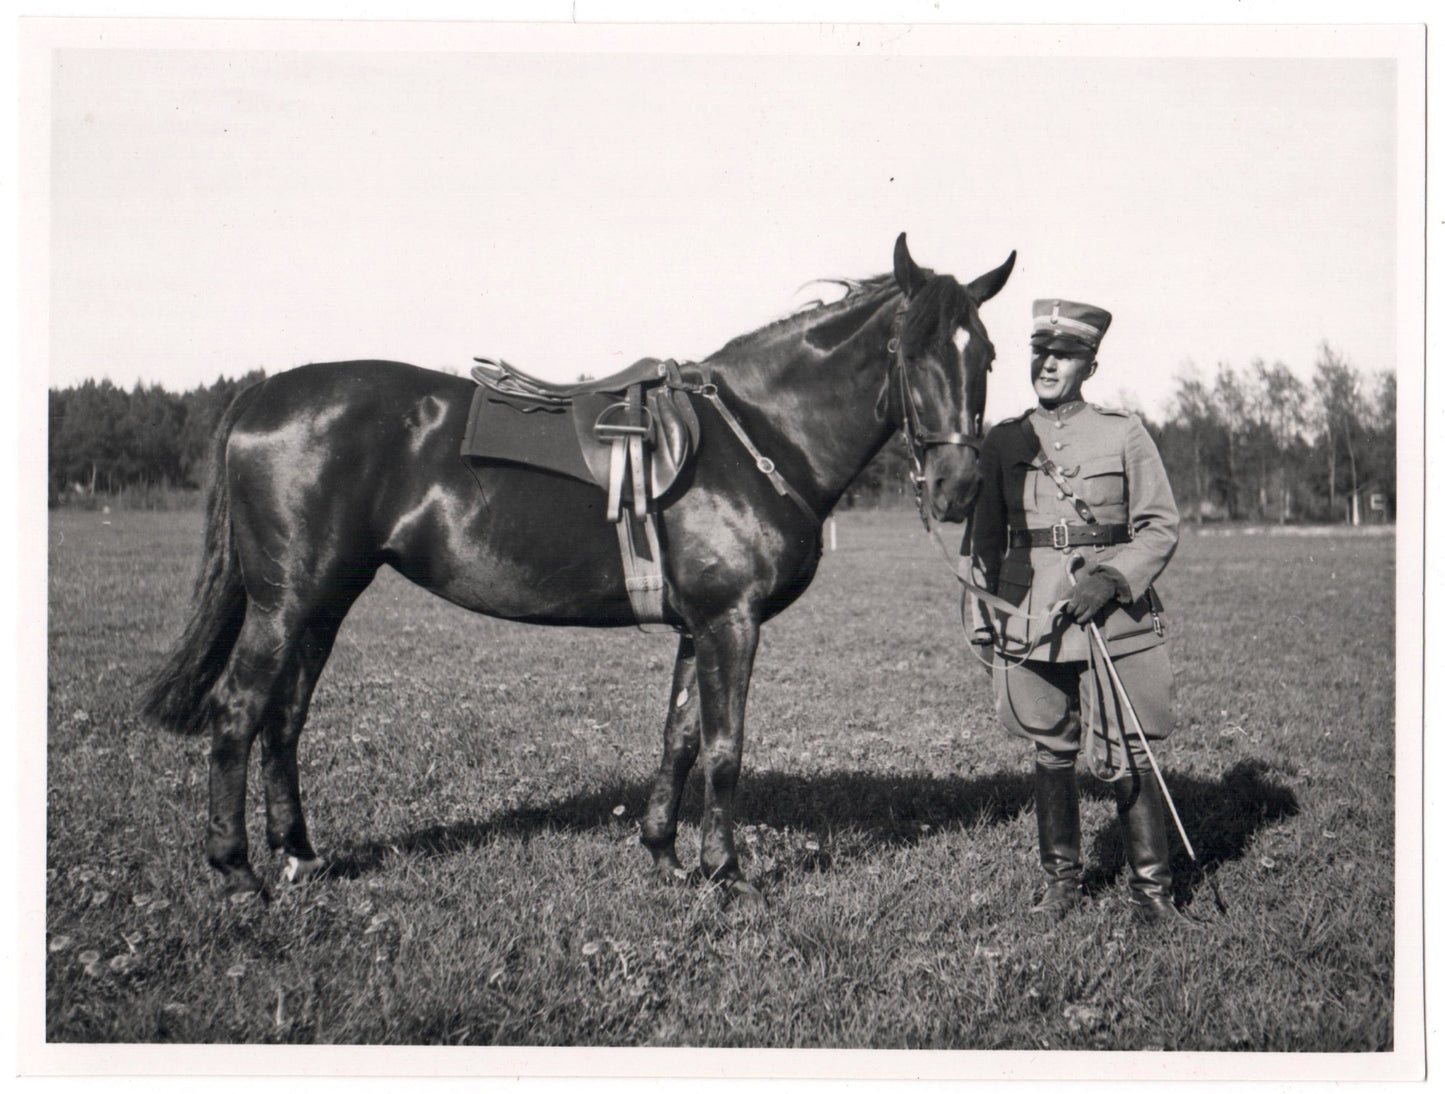 Vintage Photography - Military Forces - Solider - Military and Horse - Sweden